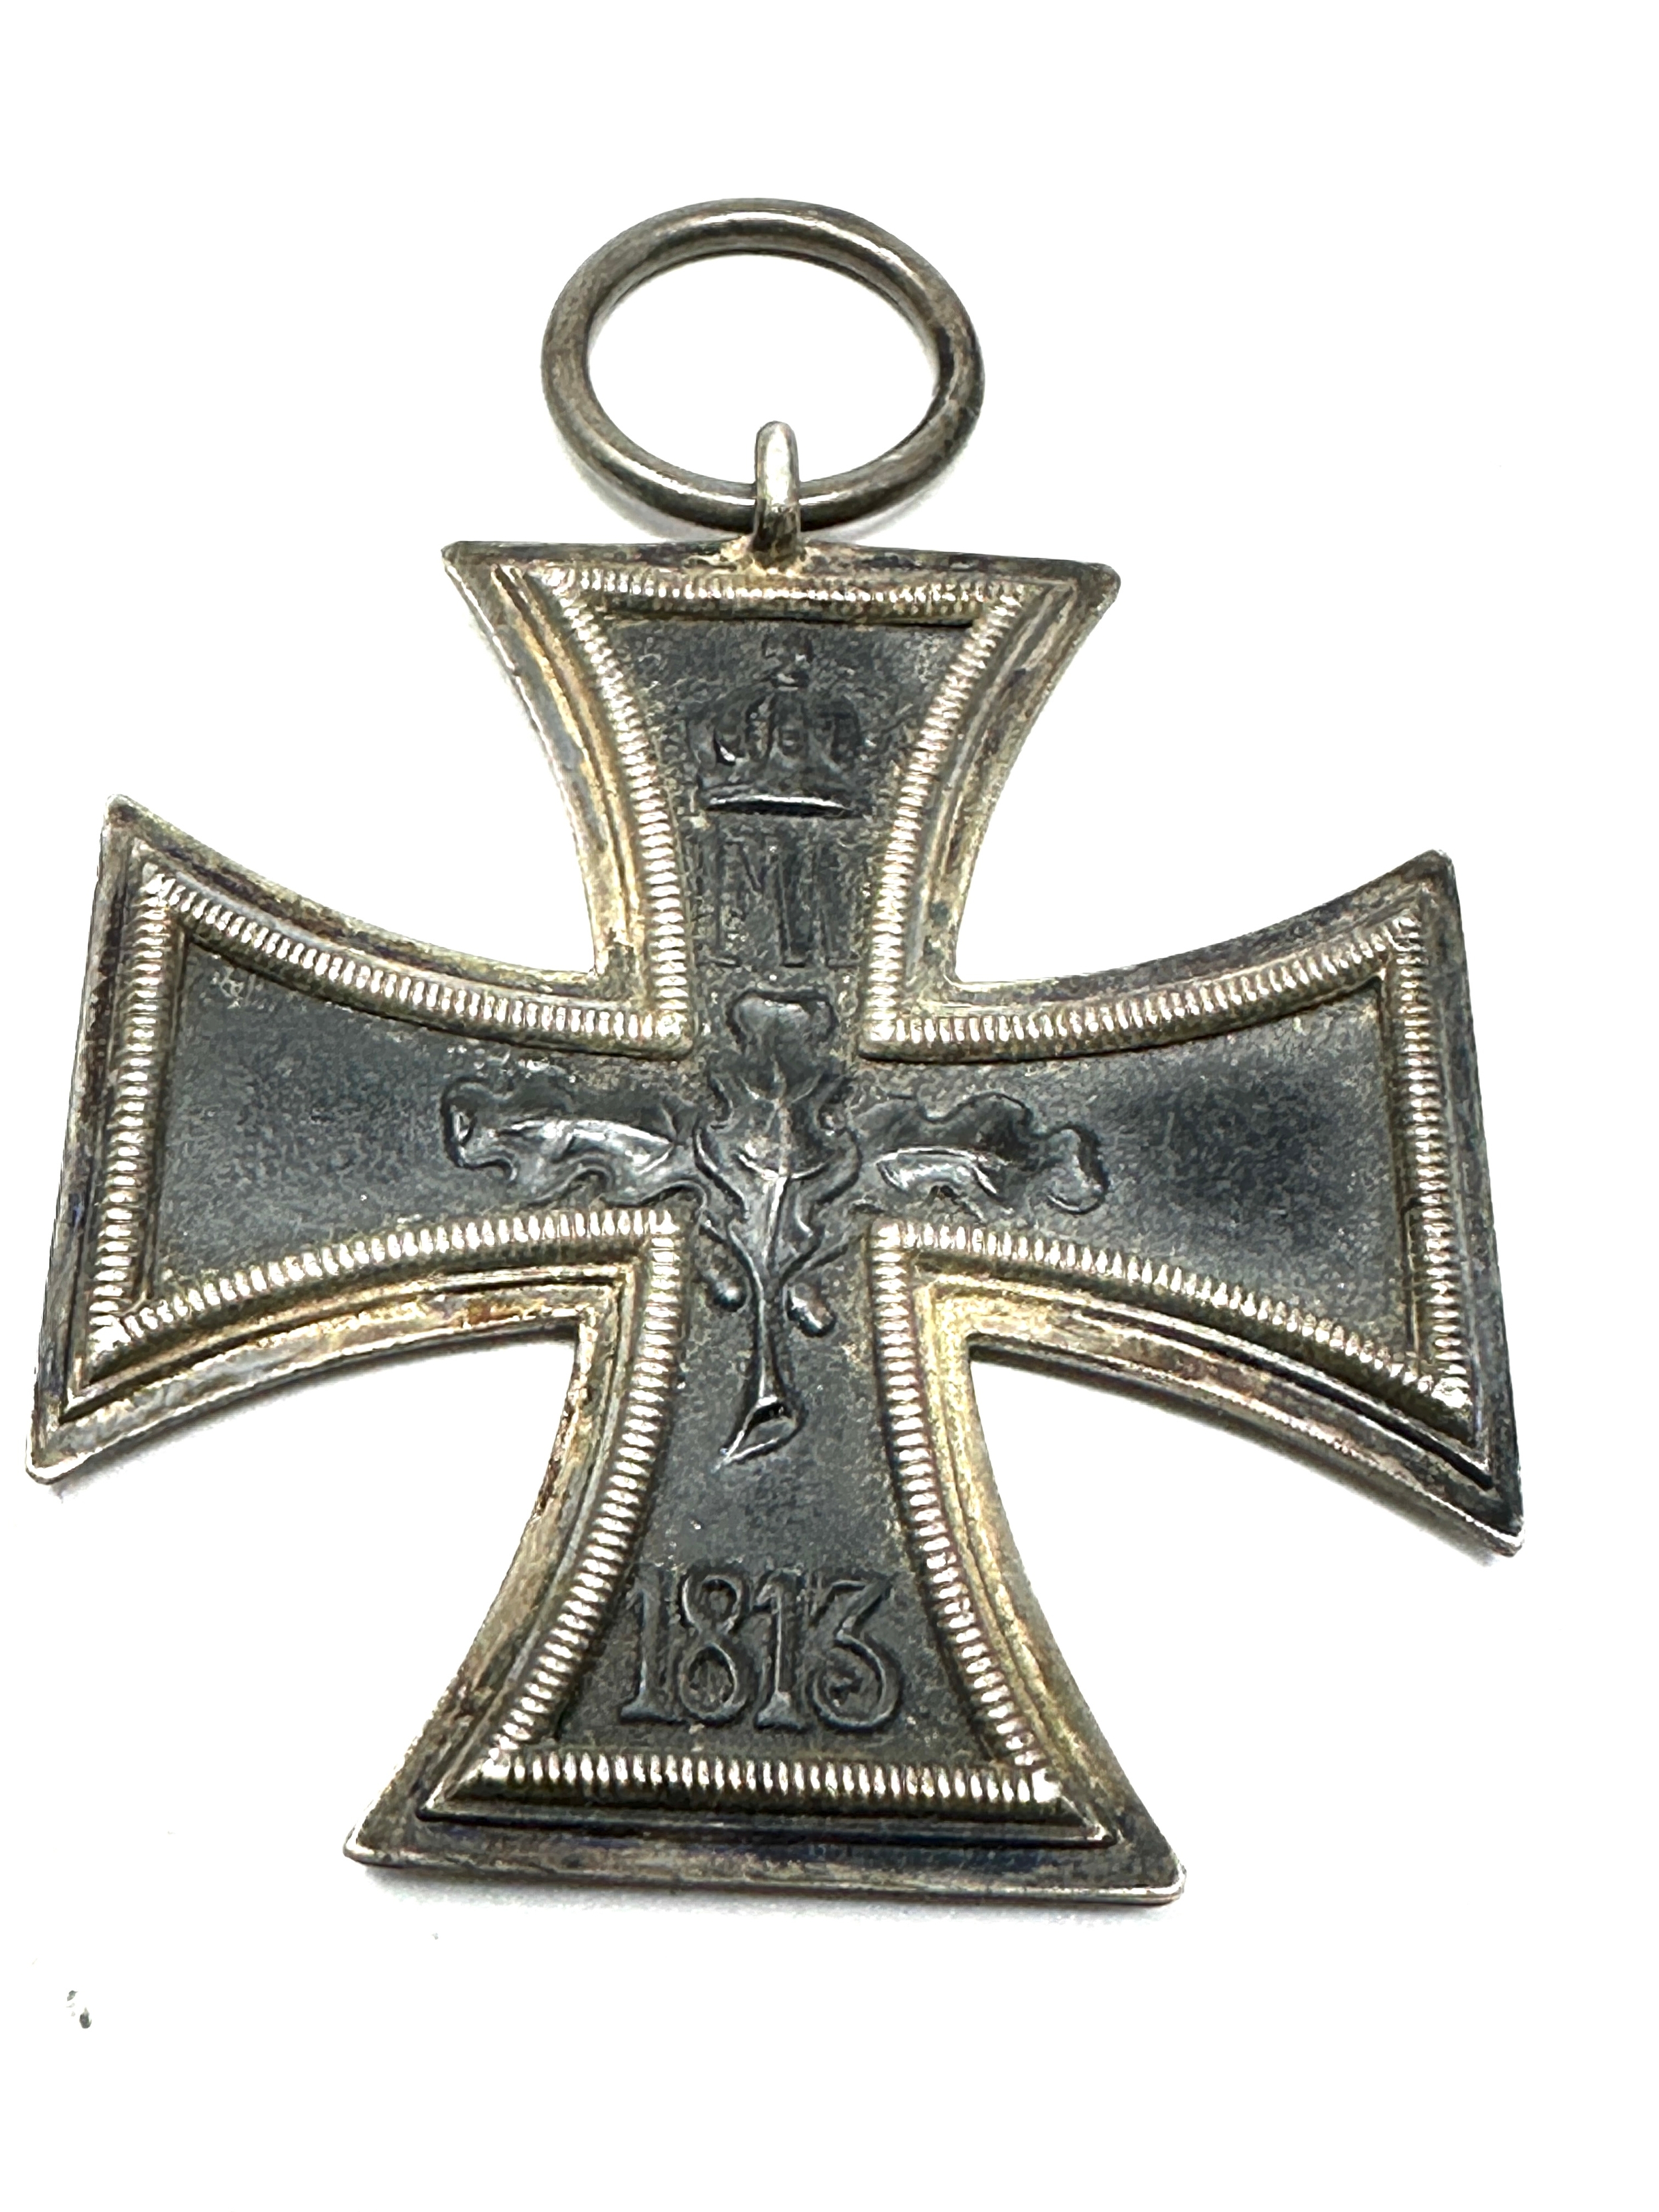 ww1 German iron cross 2nd class maker stamp on ring - Image 2 of 3